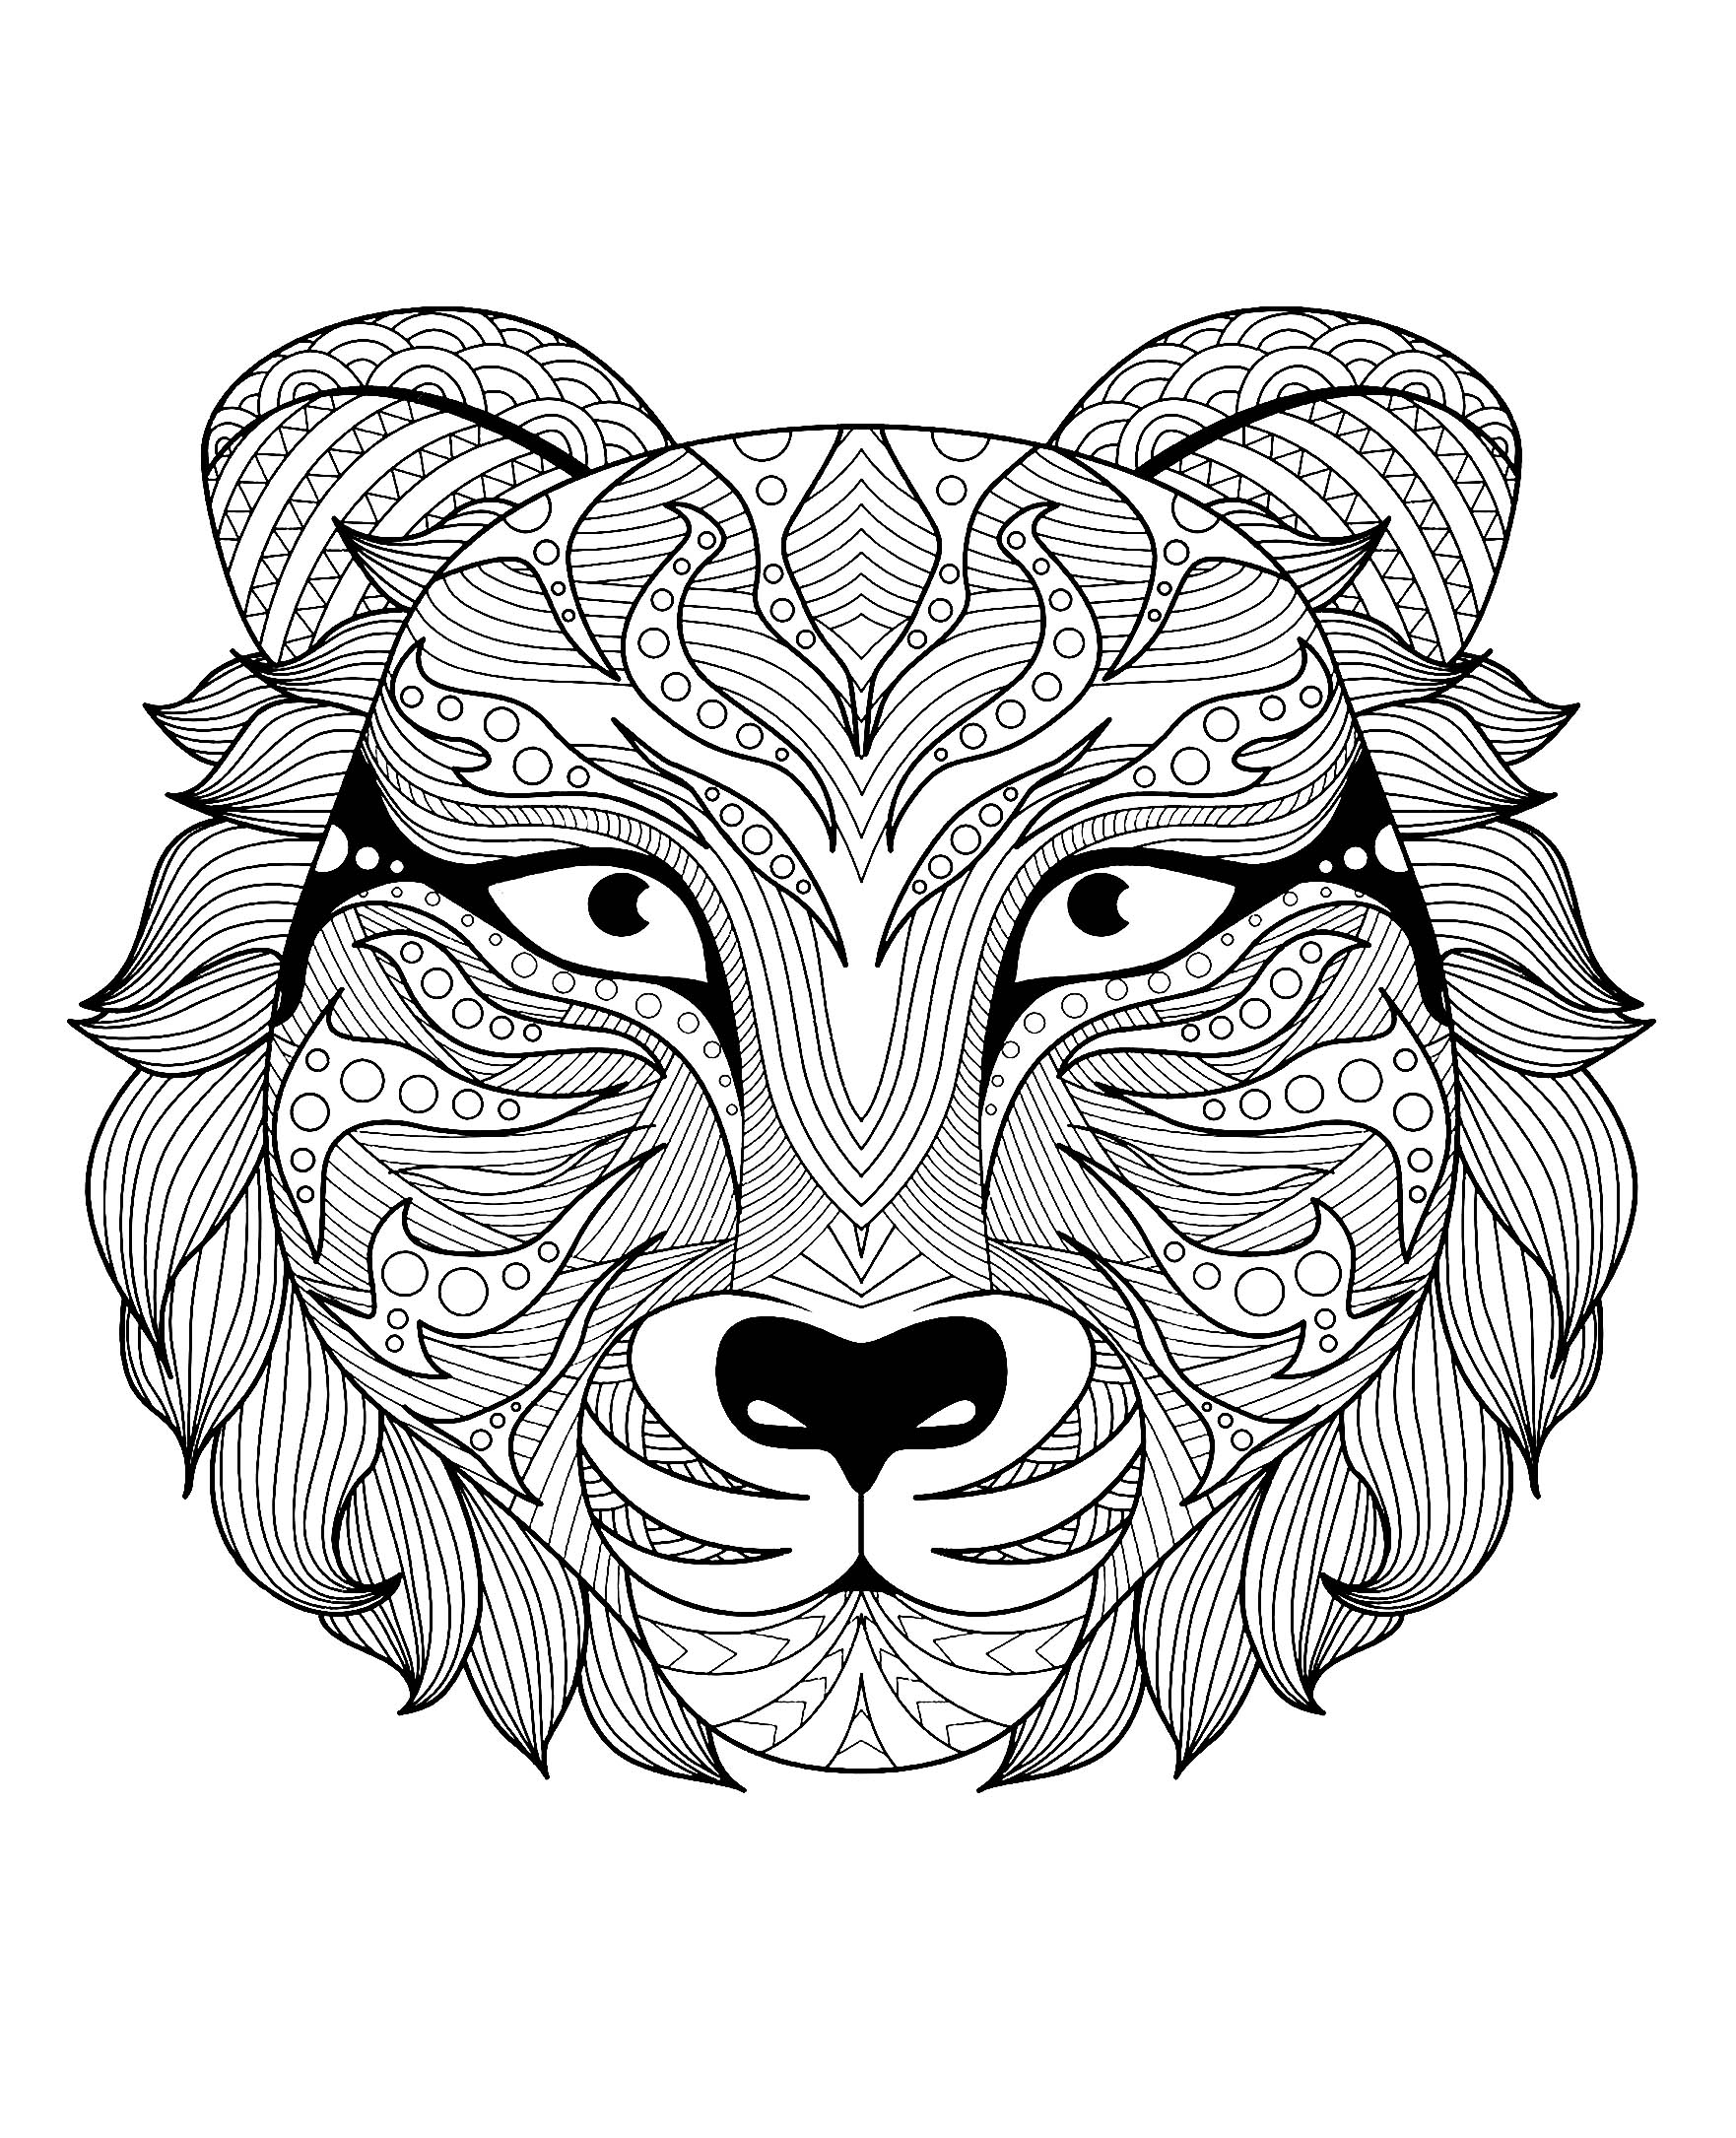 Download Tigers free to color for kids - Tigers Kids Coloring Pages